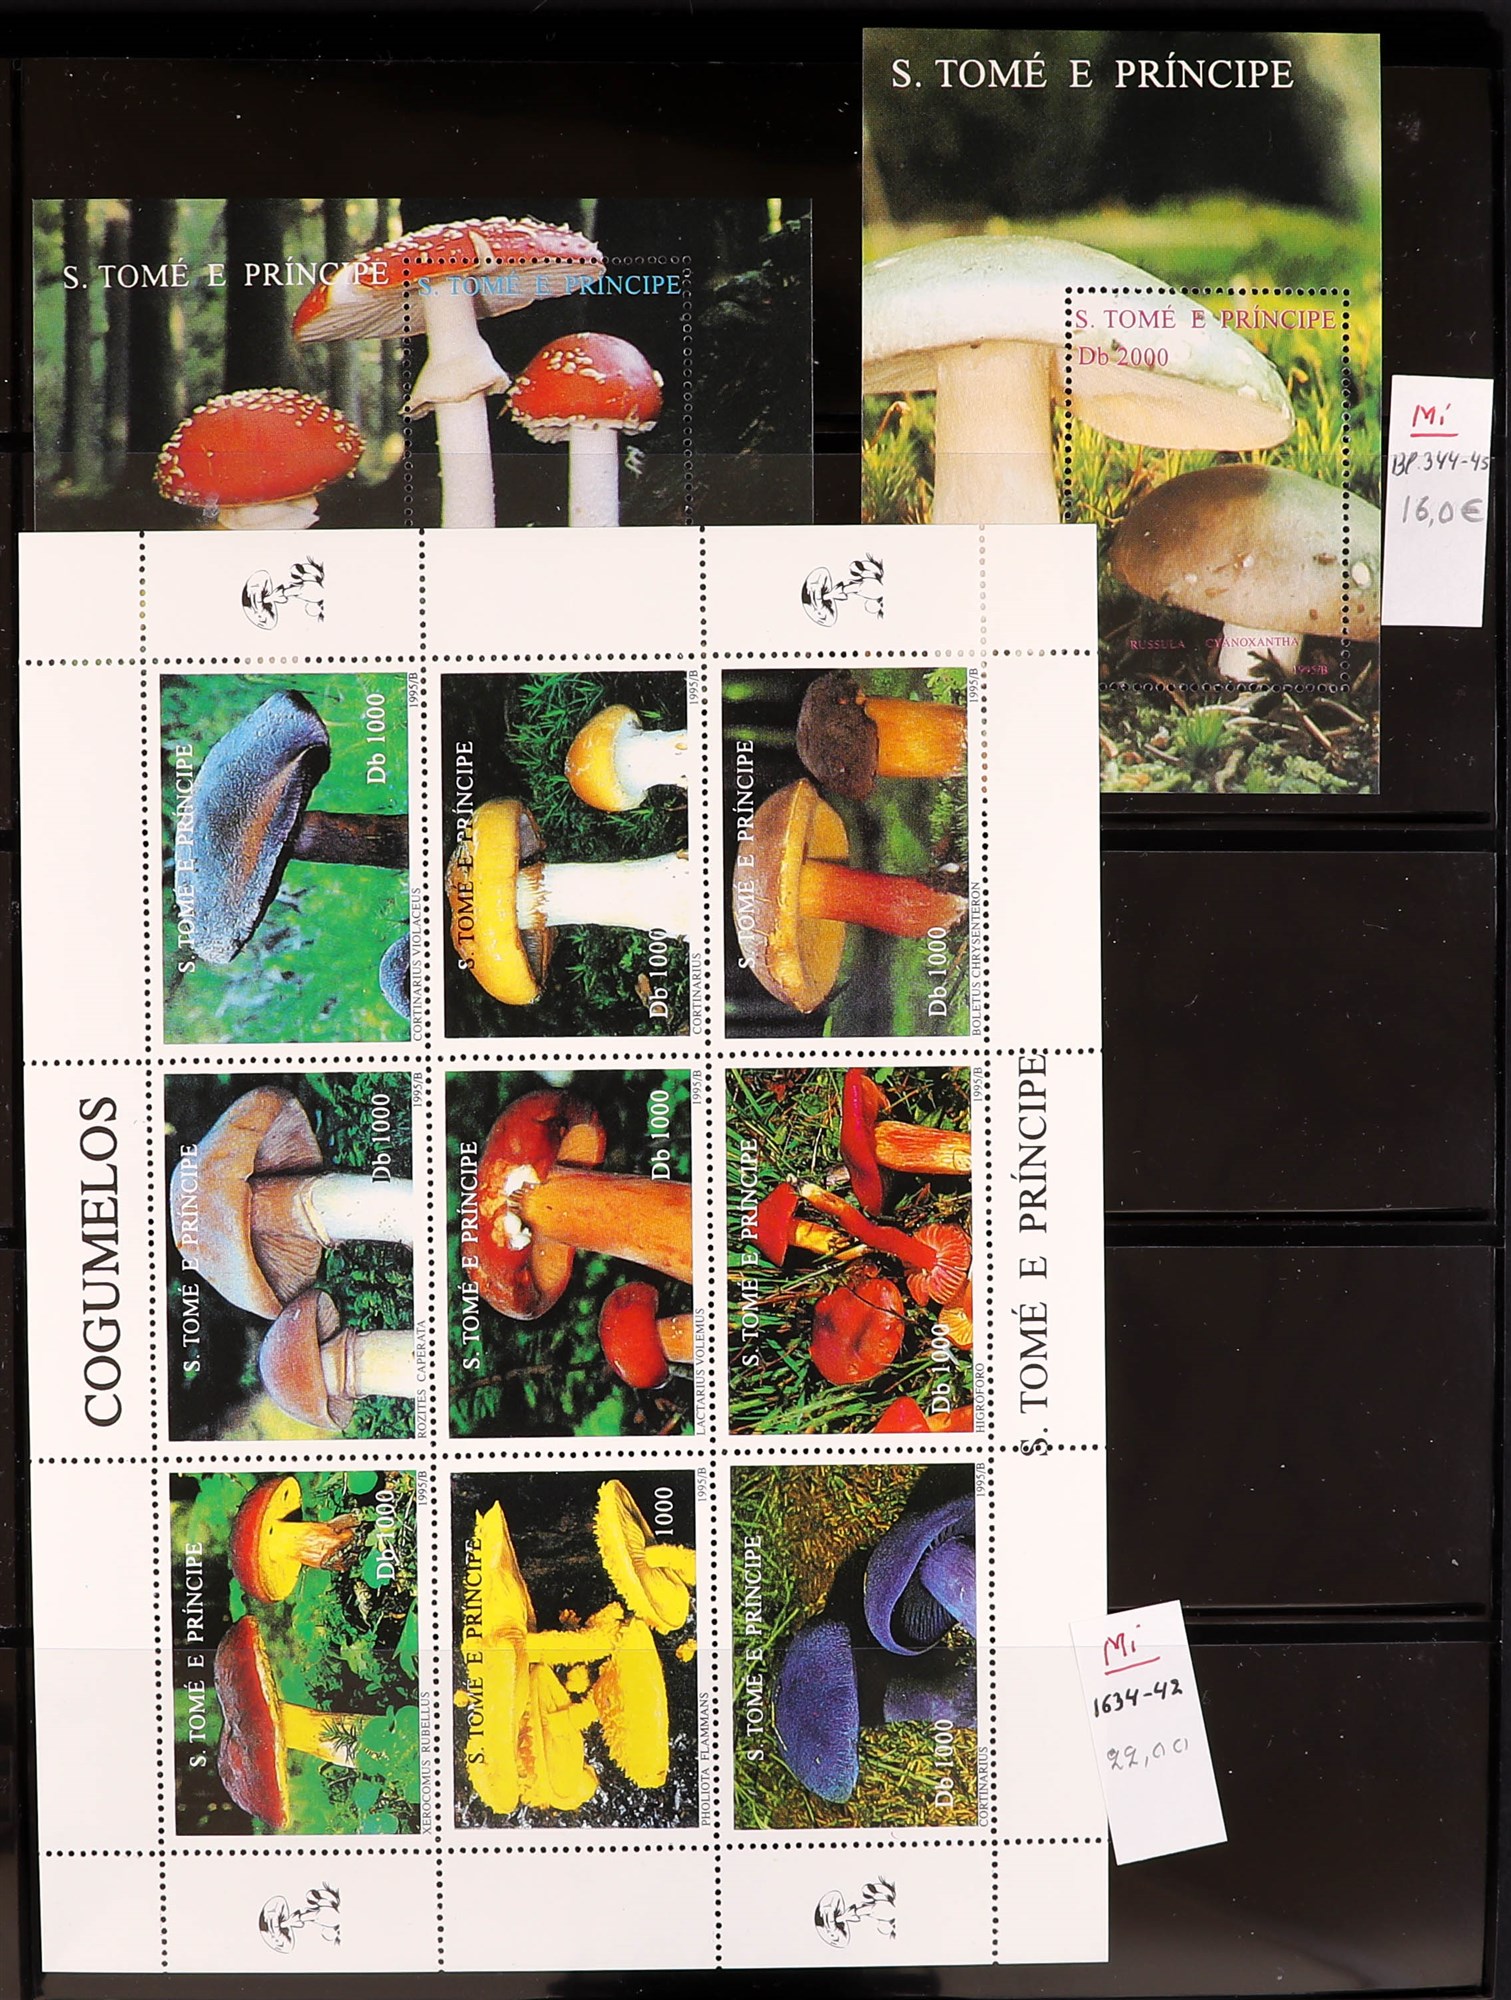 PORTUGUESE COLONIES FUNGI STAMPS OF ST THOMAS & PRINCE ISLANDS 1984 - 2014 never hinged mint - Image 14 of 30